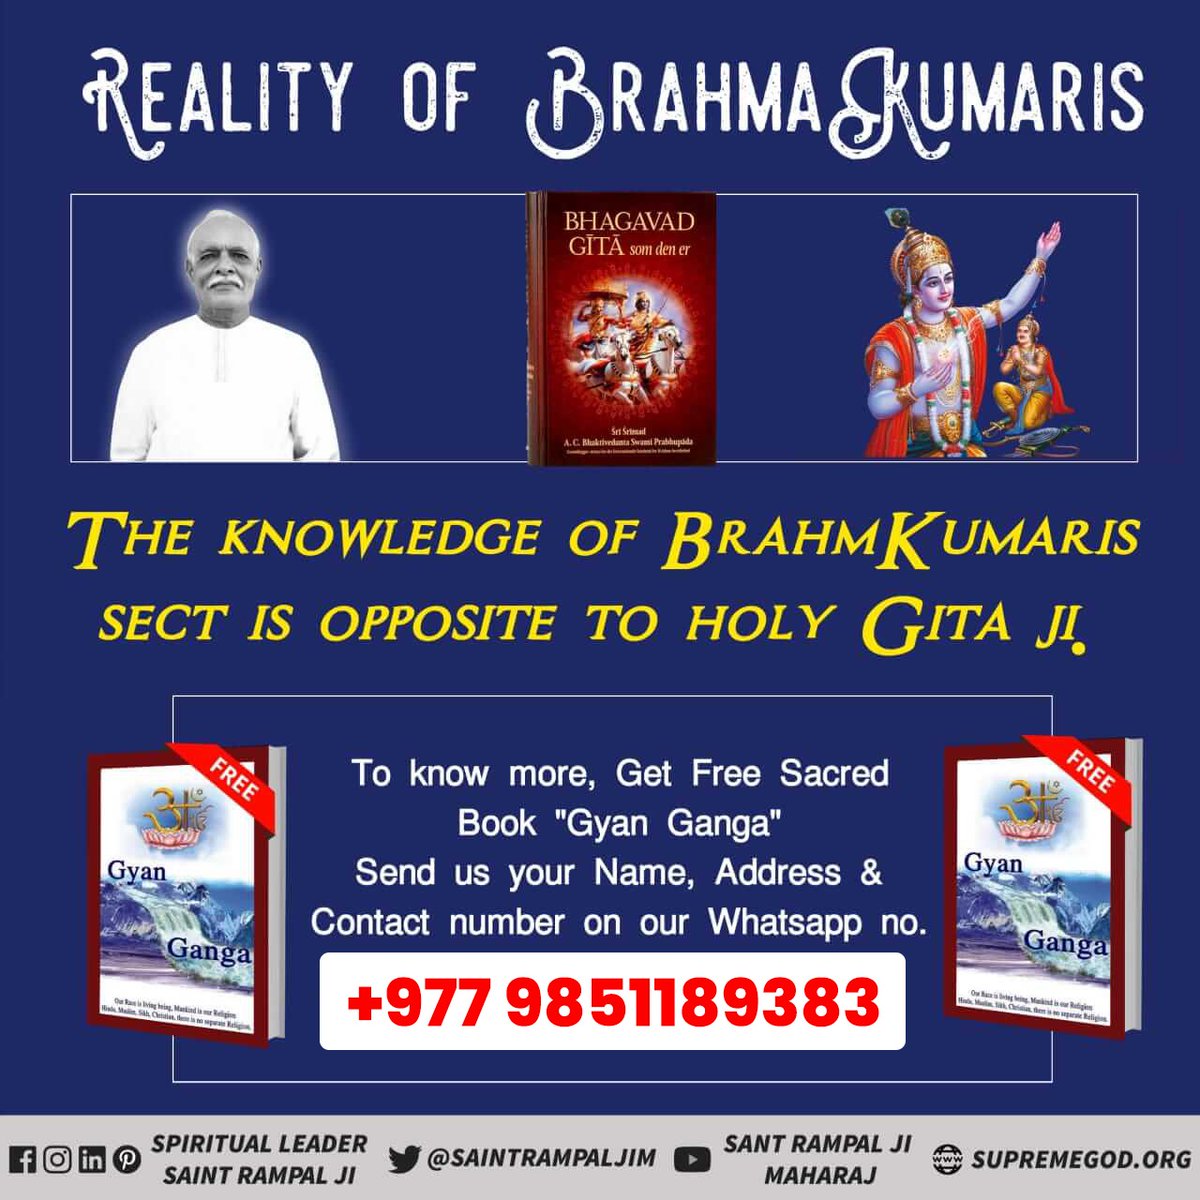 #Reality_Of_BrahmaKumari_Panth Activities such as forced meditation, practicing celibacy have been refuted in Bhagavad Gita as ways of worship opposite to the injunctions of holy scriptures plus those following such activities have been categorized as people with demonic nature.